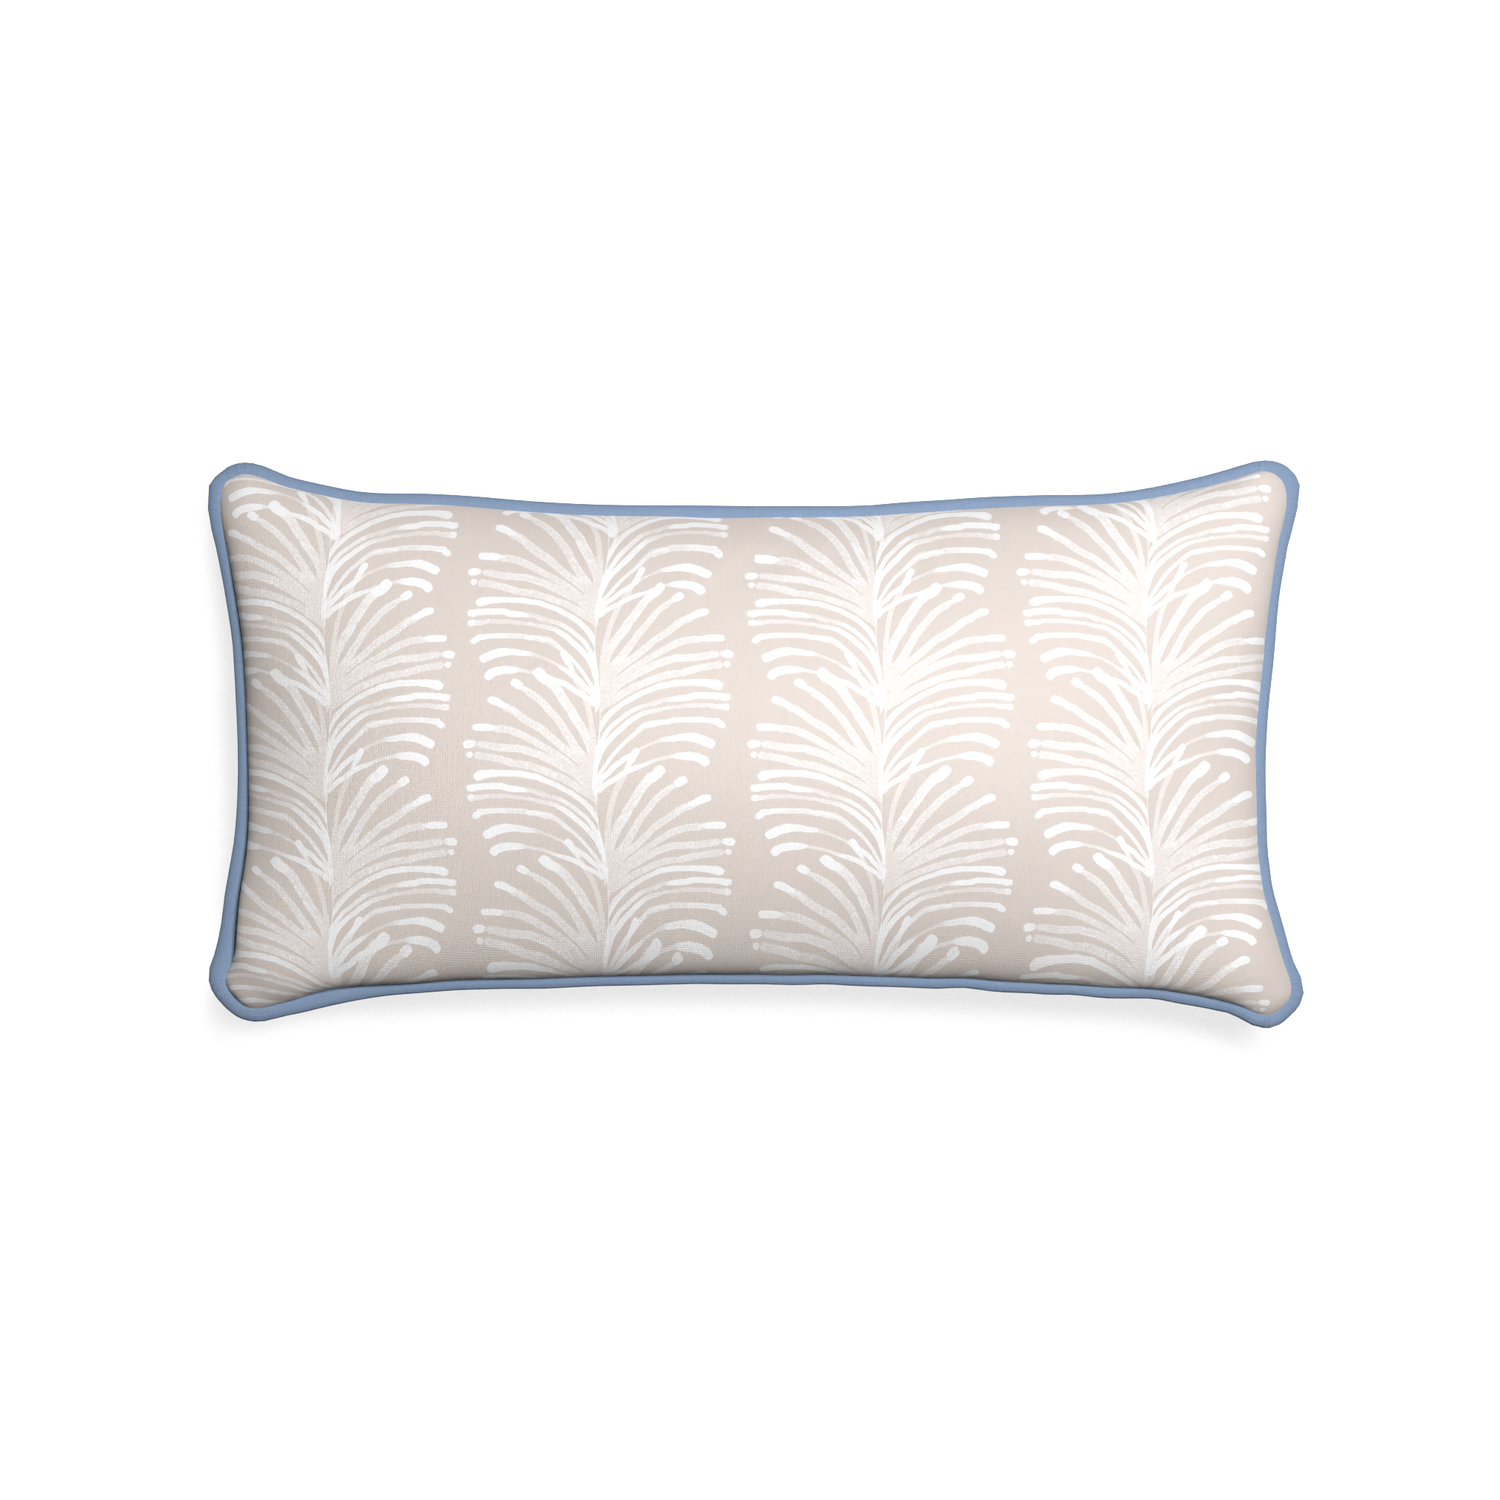 Midi-lumbar emma sand custom sand colored botanical stripepillow with sky piping on white background